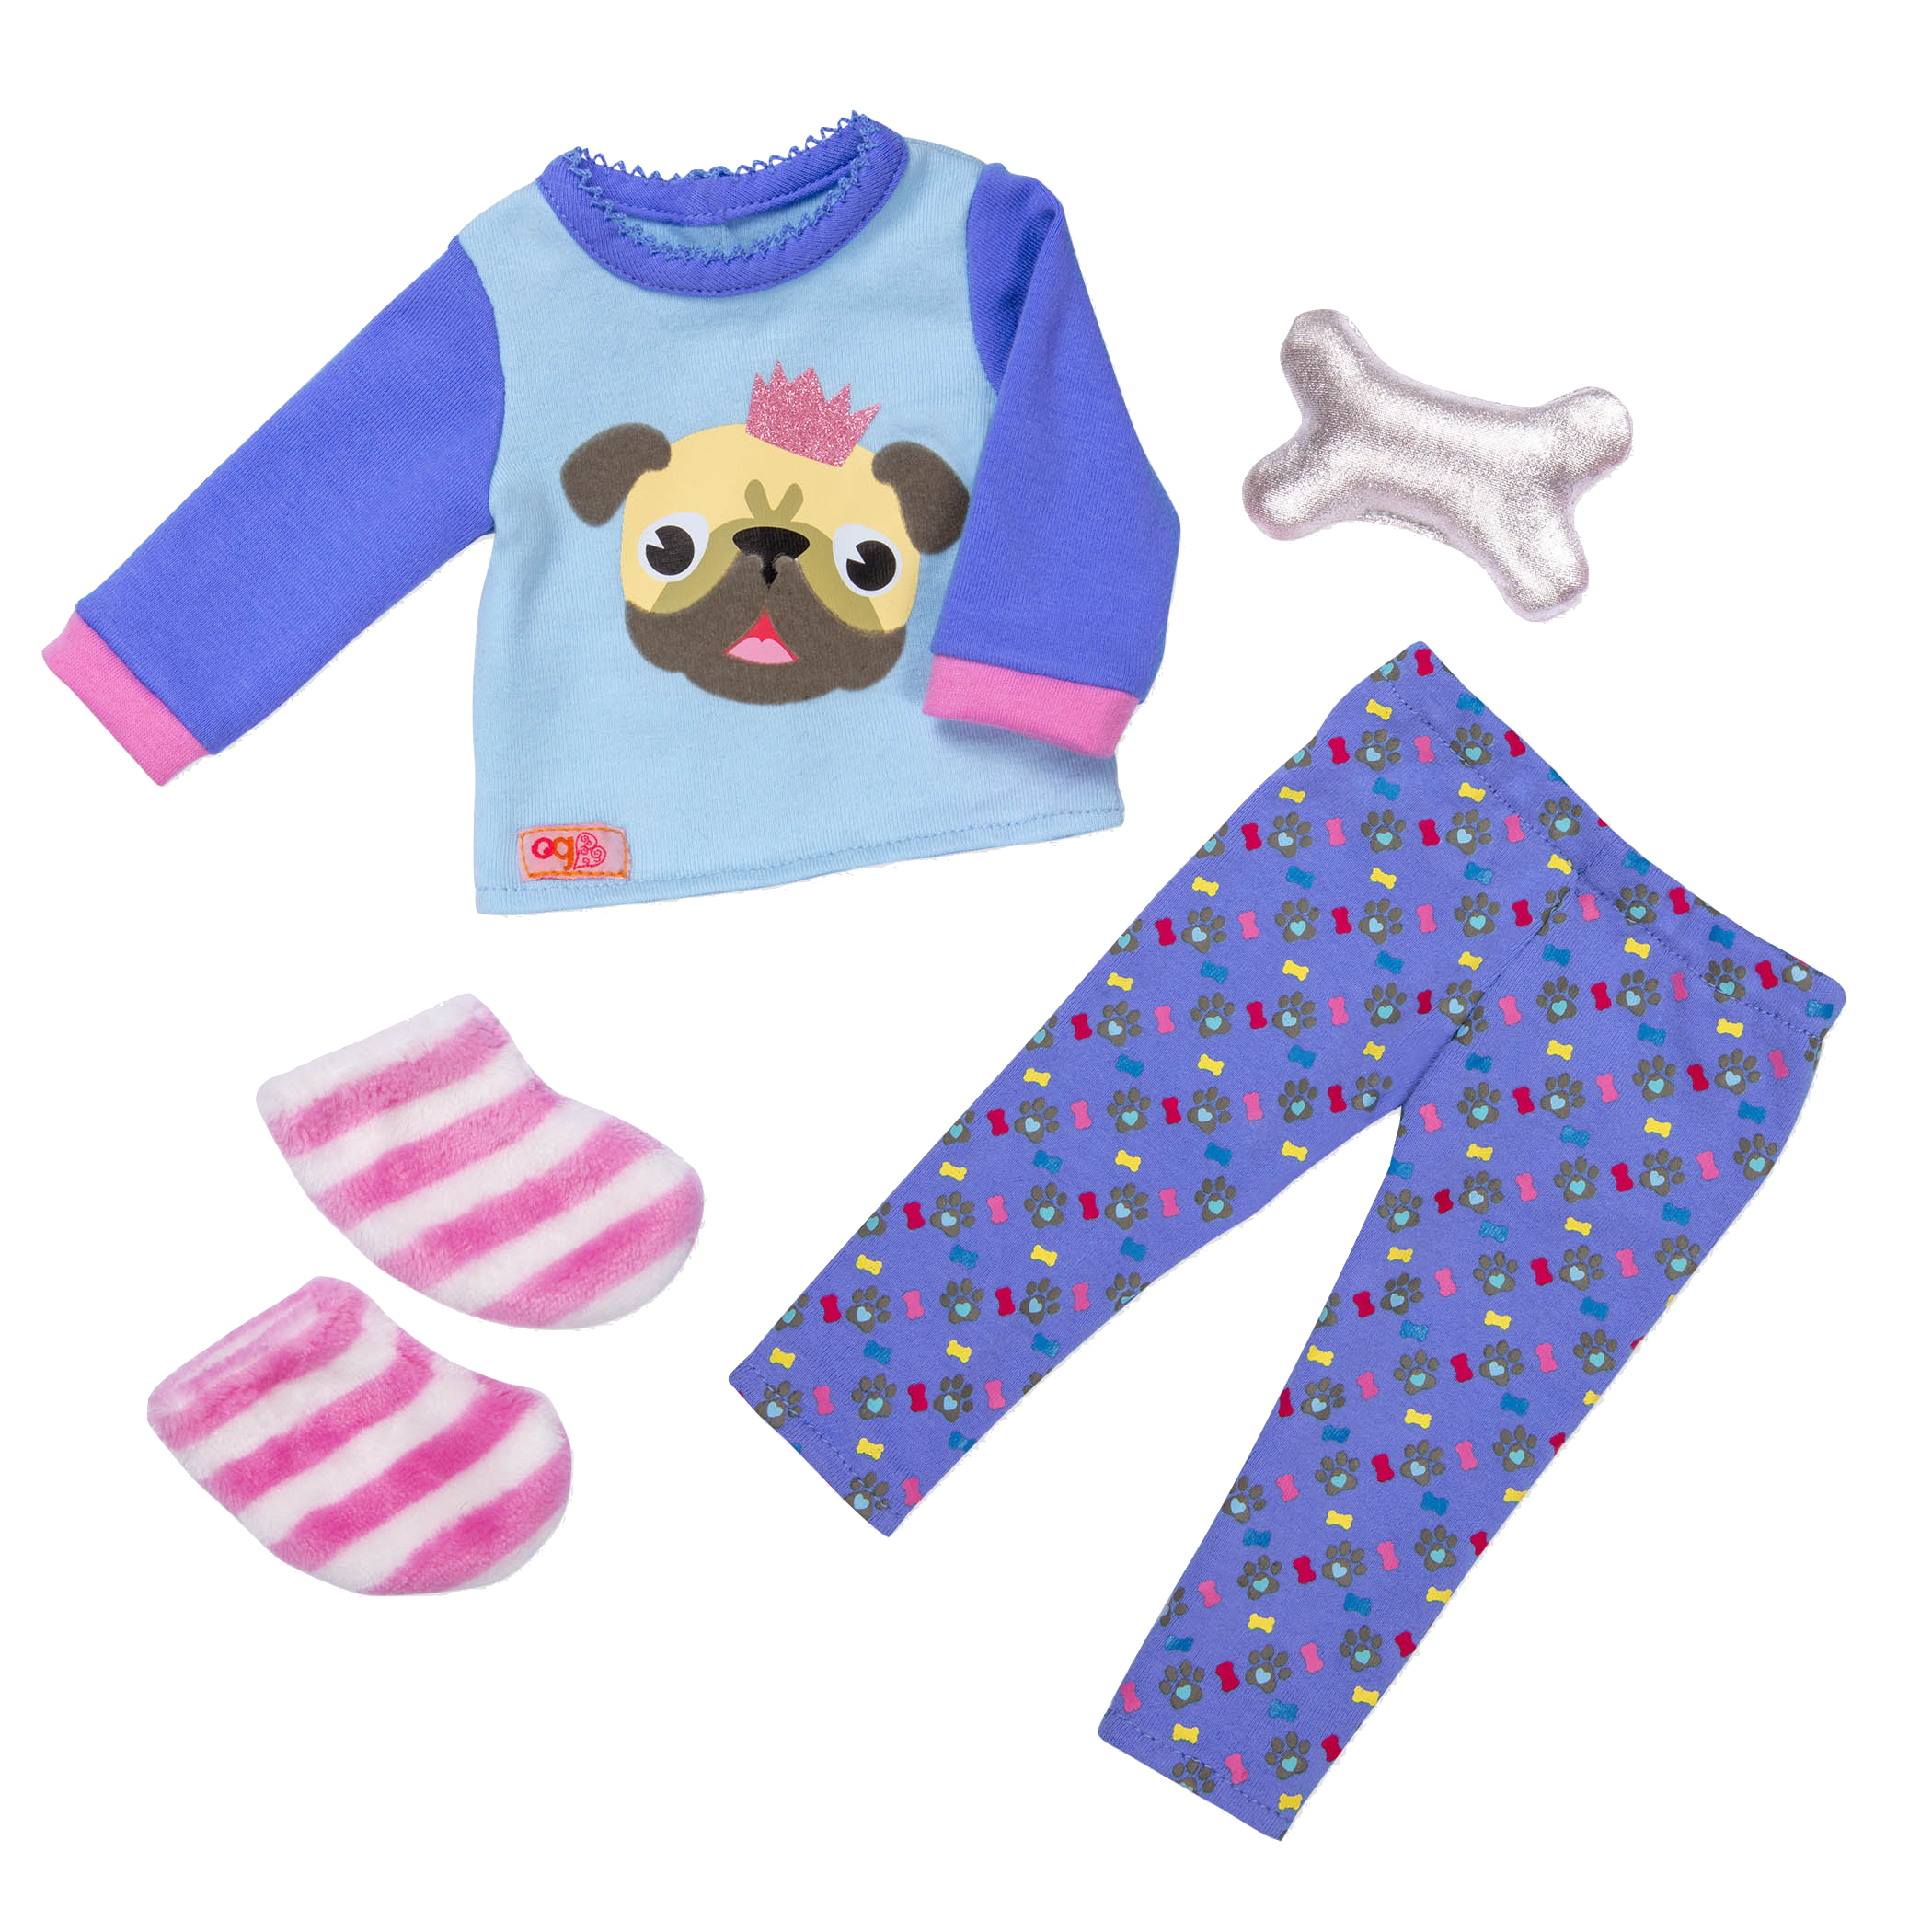 Pug-jama Party Sleepwear Outfit for 18-inch Dolls